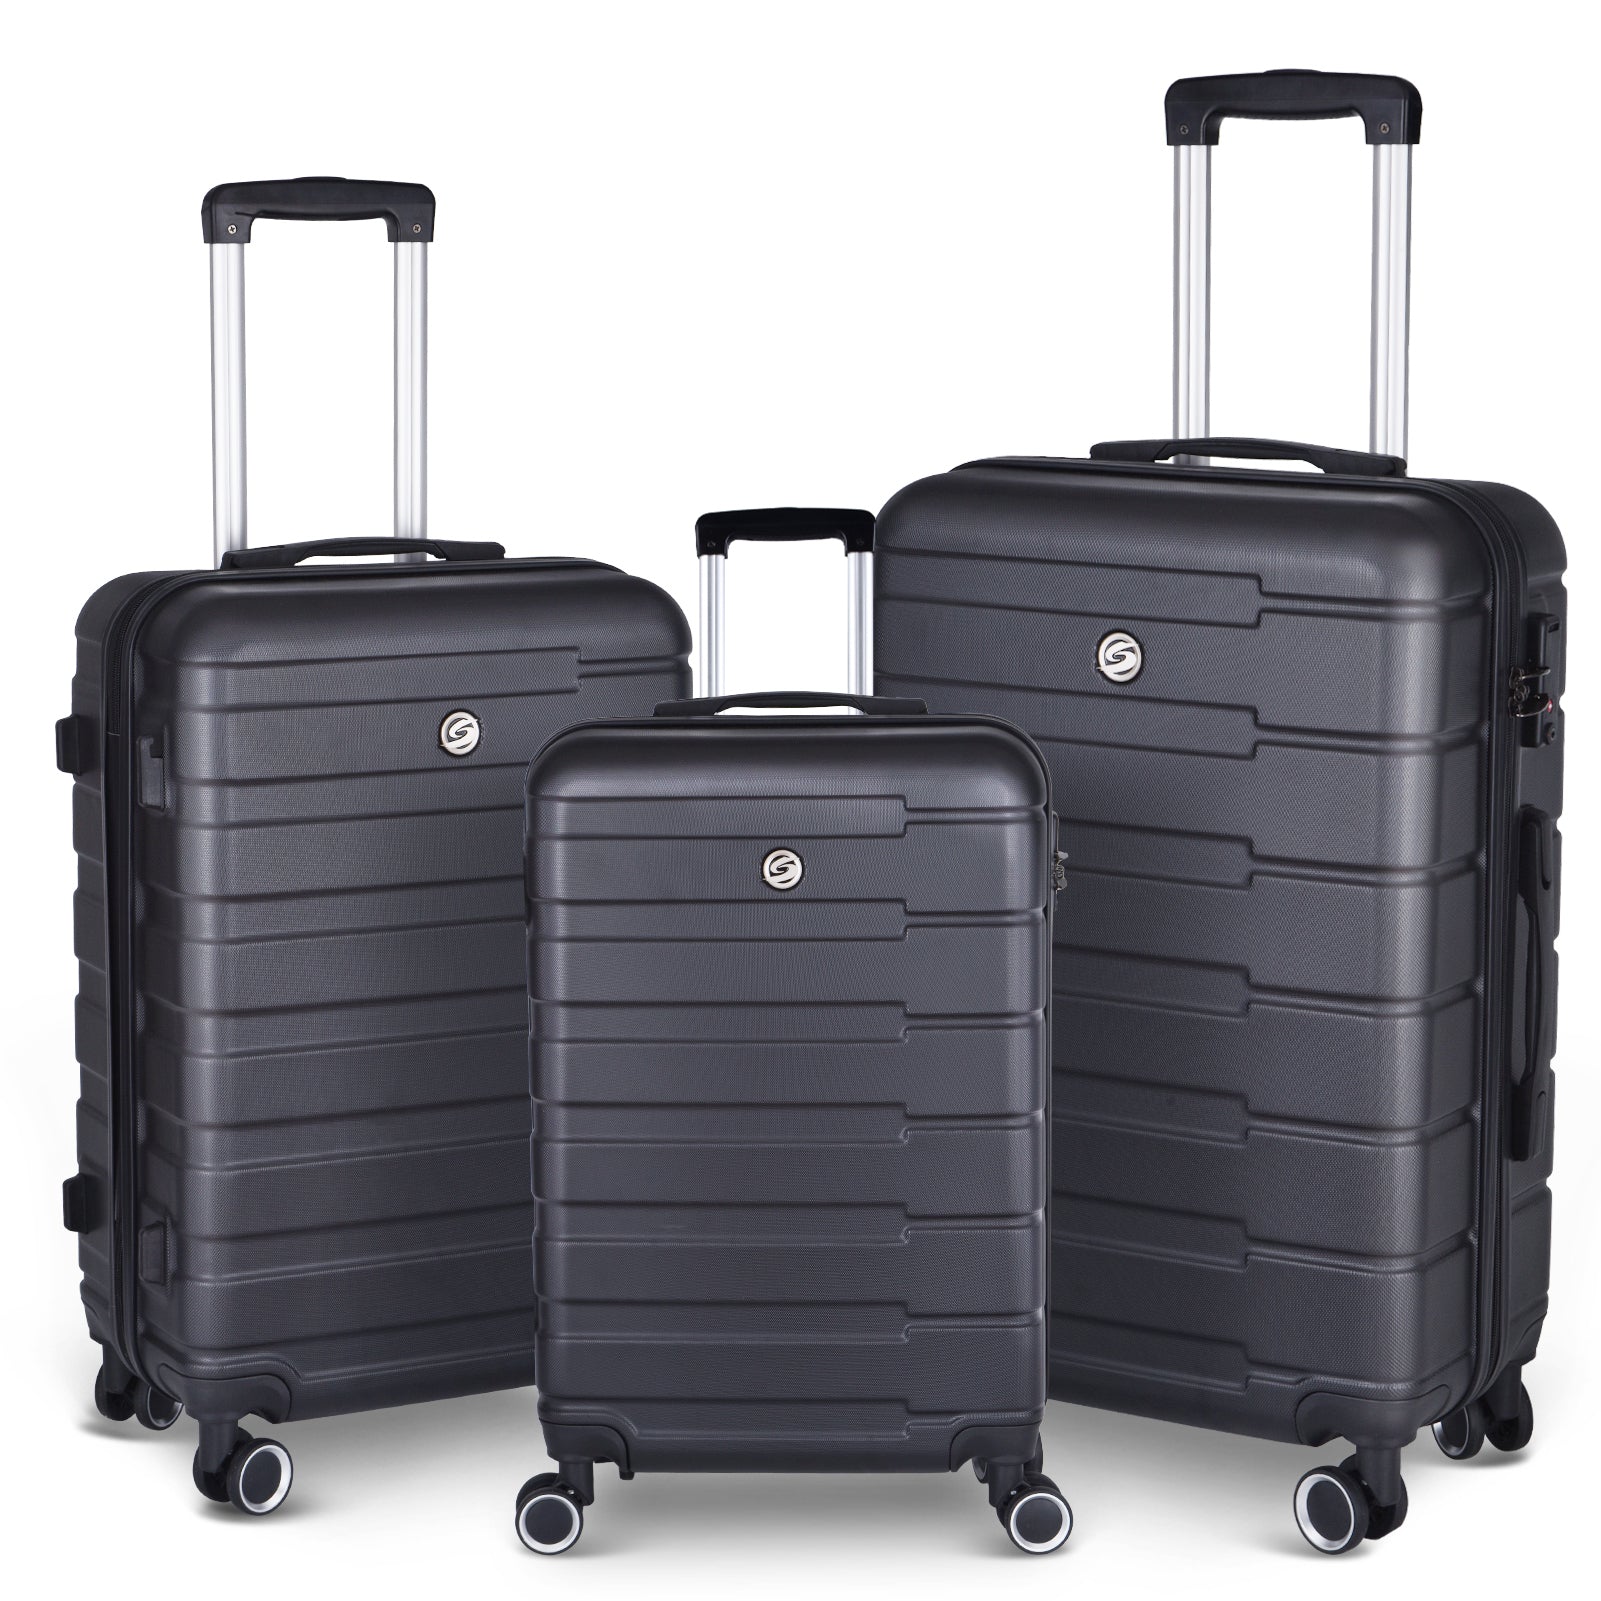 Luggage Suitcase 3 Piece Sets Hardside Carry on black-abs